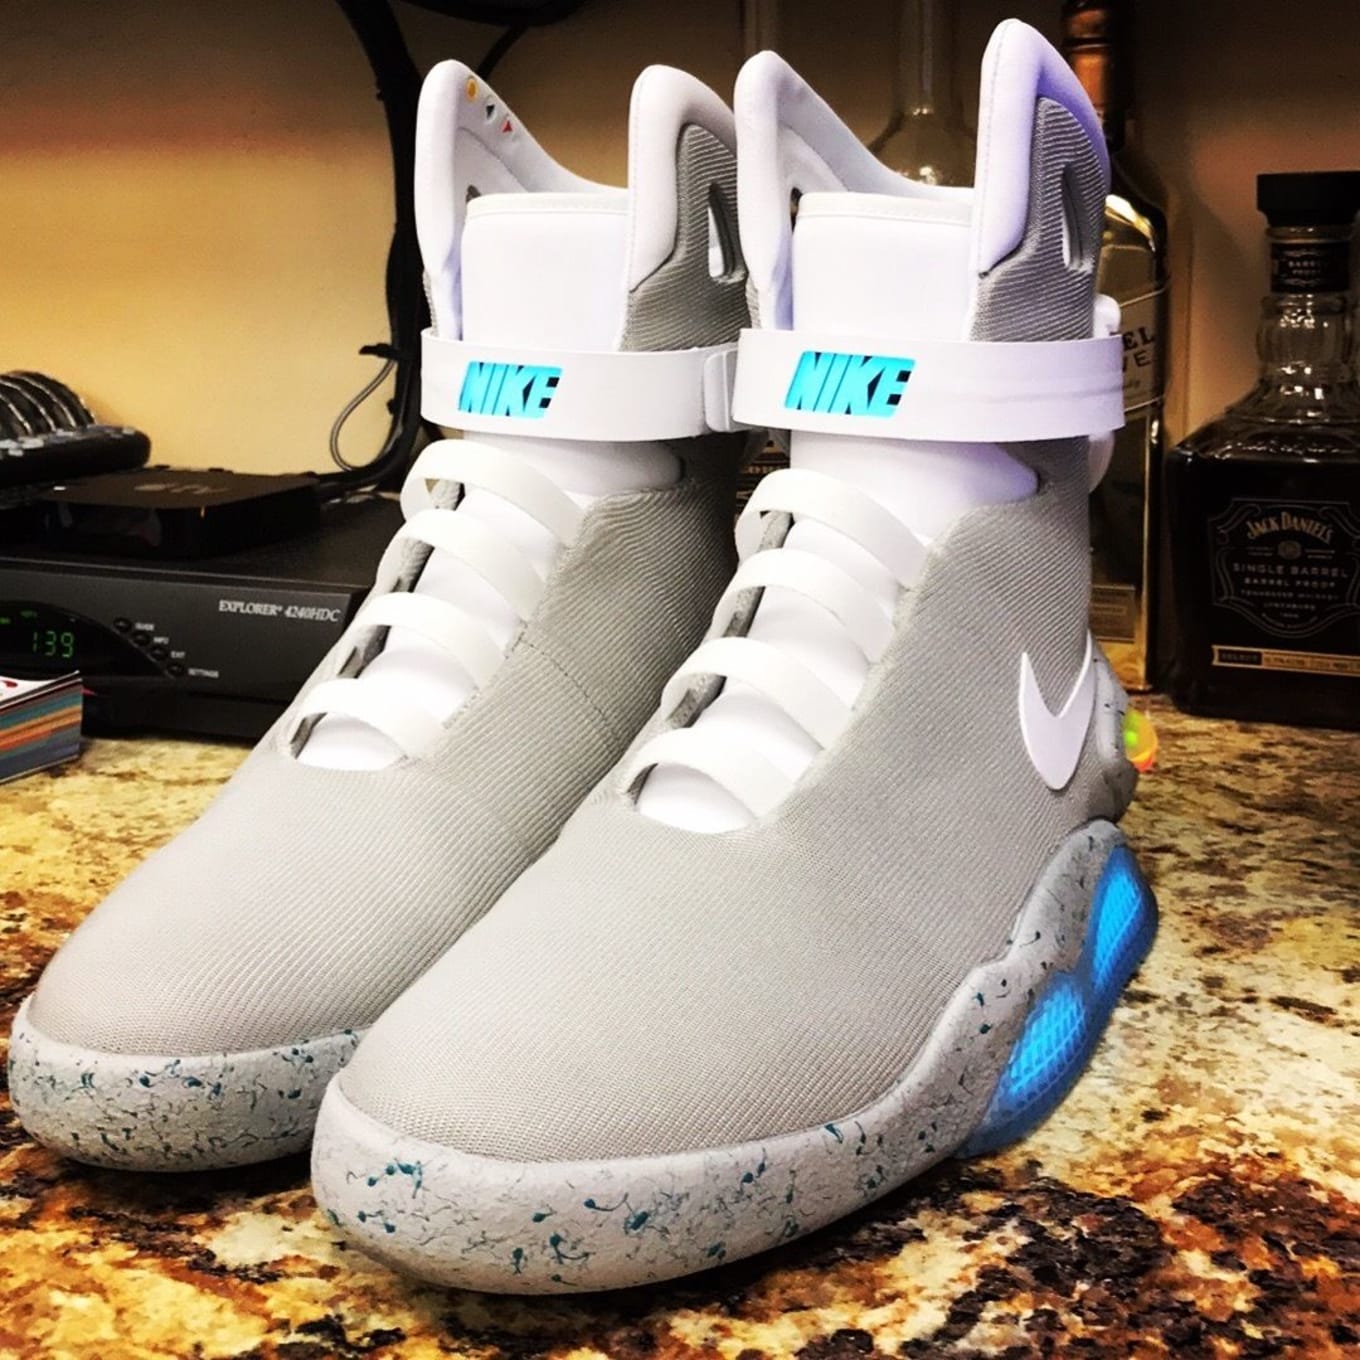 Nike Mag Auto Lacing Price | Sole Collector